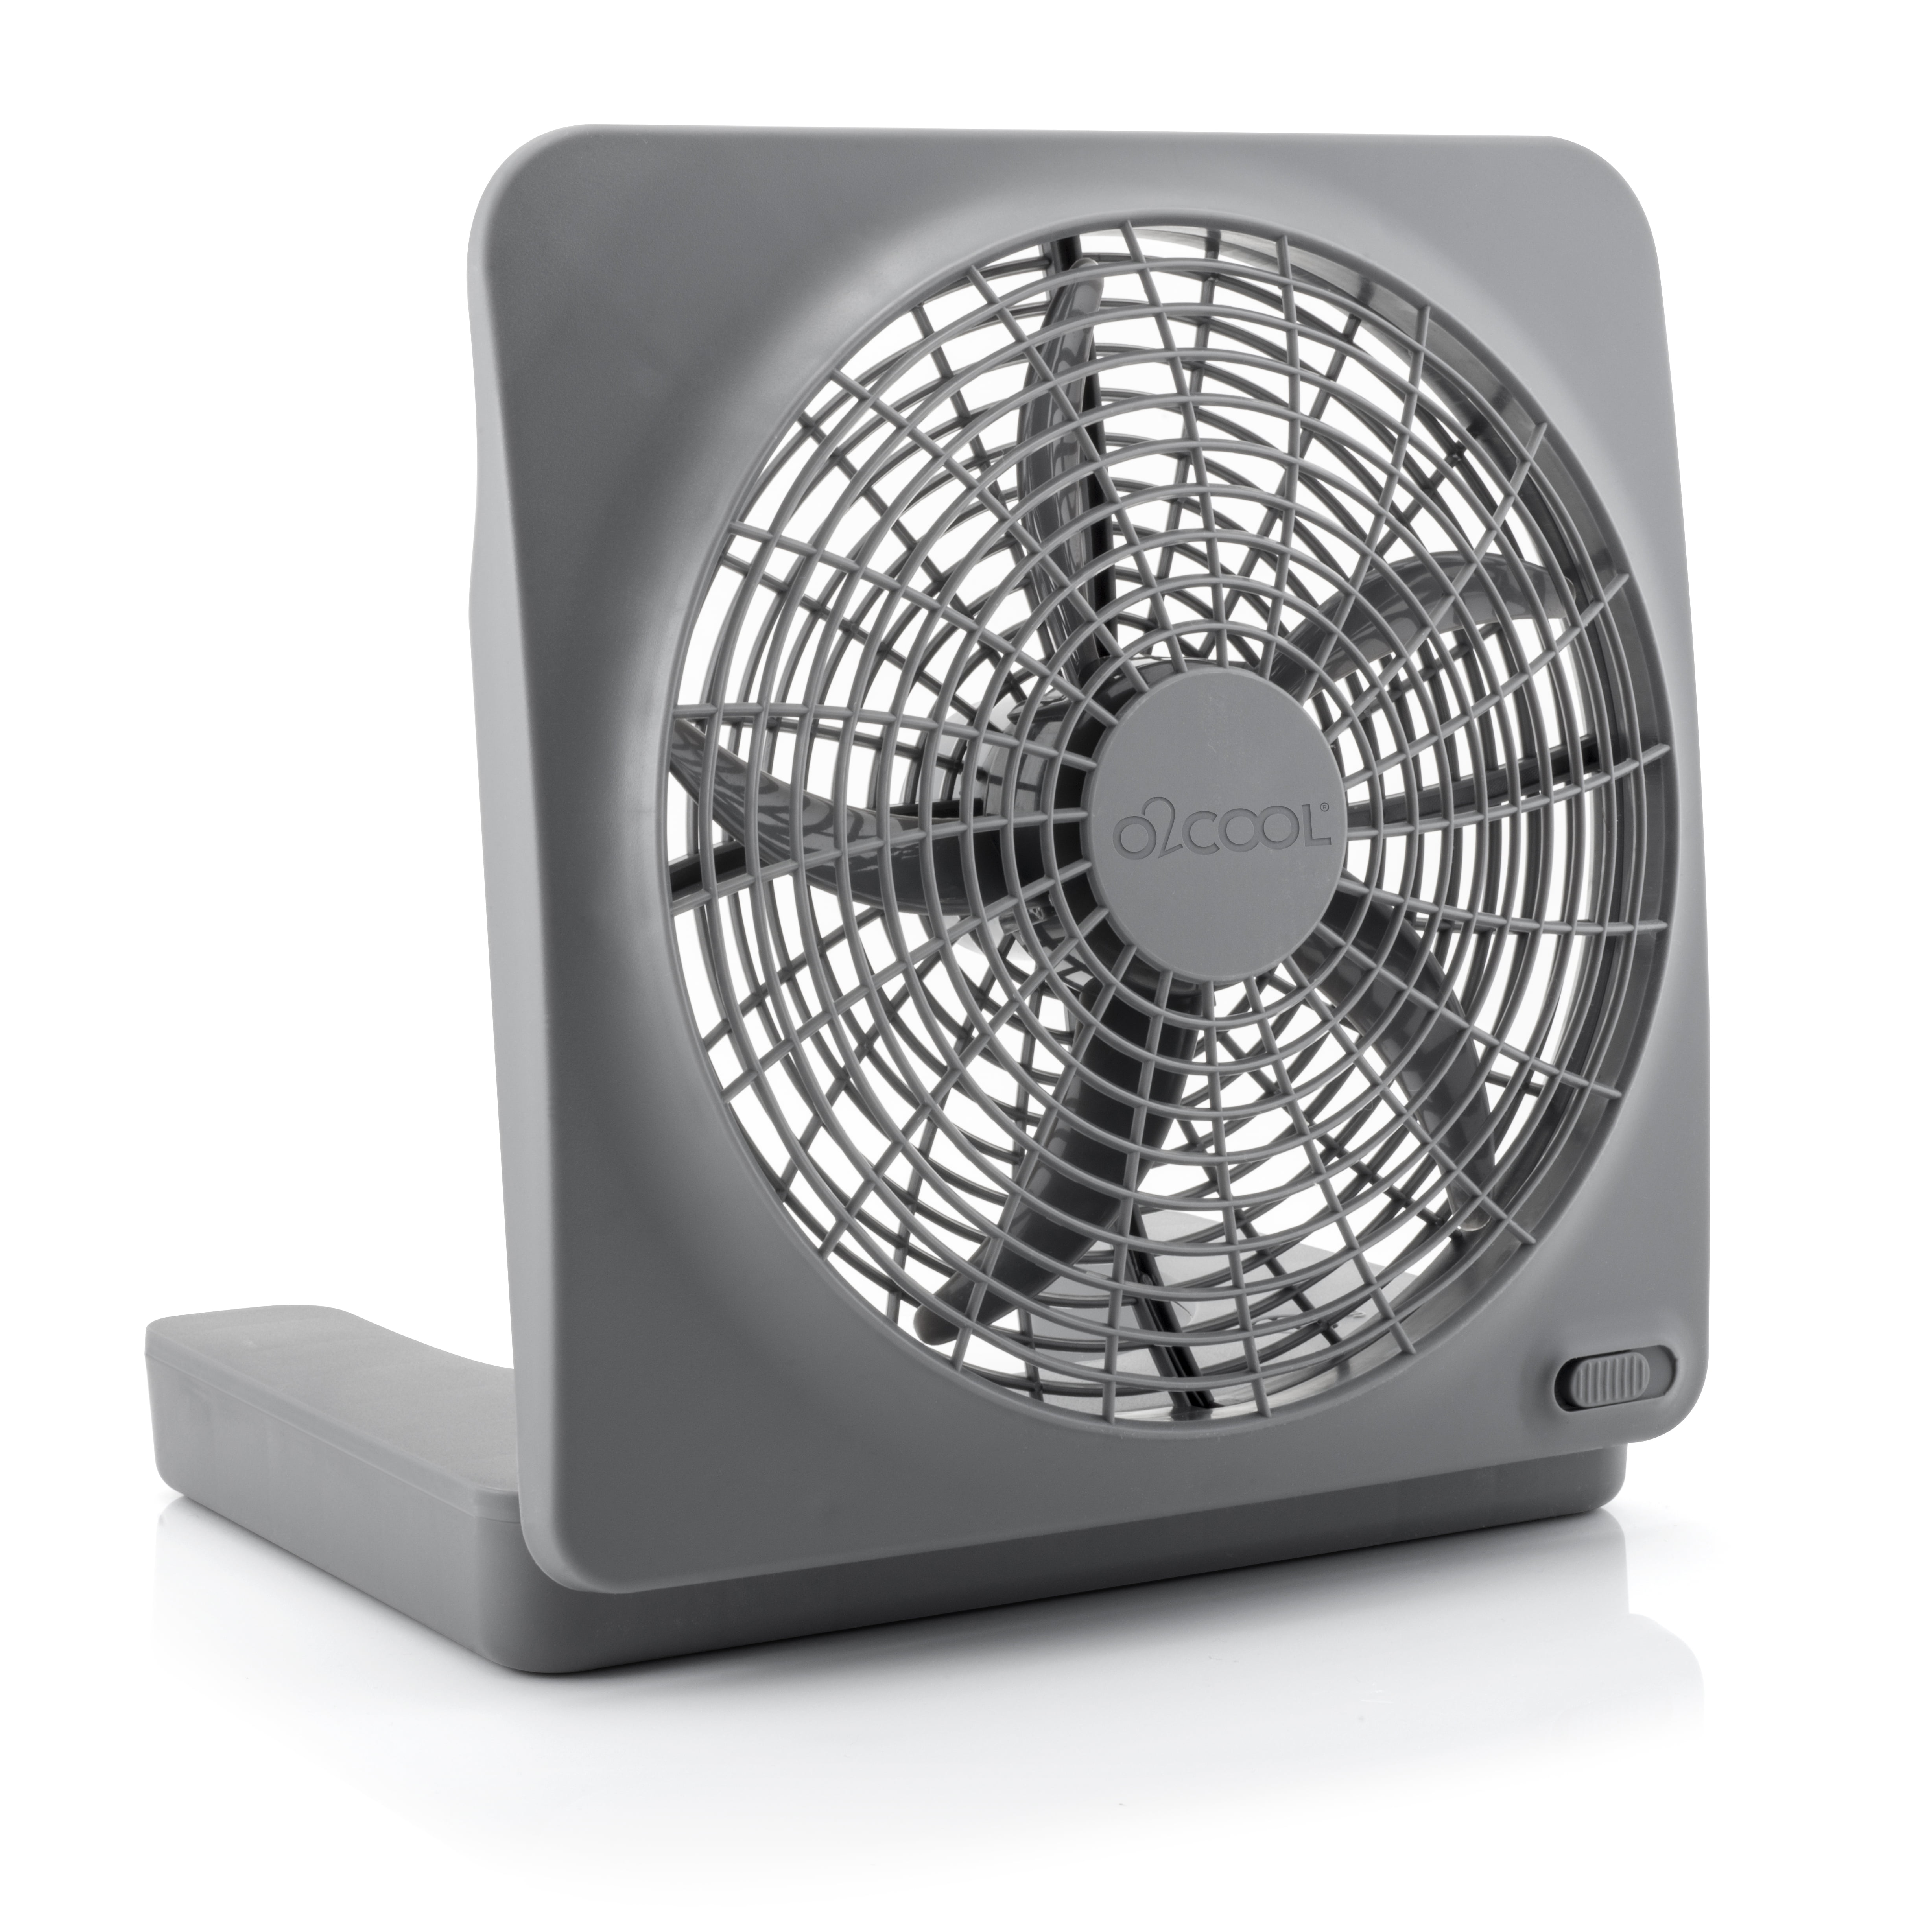 O2COOL 5" Battery Operated Portable Fan in White/GreyNewFREE SHIPPING 